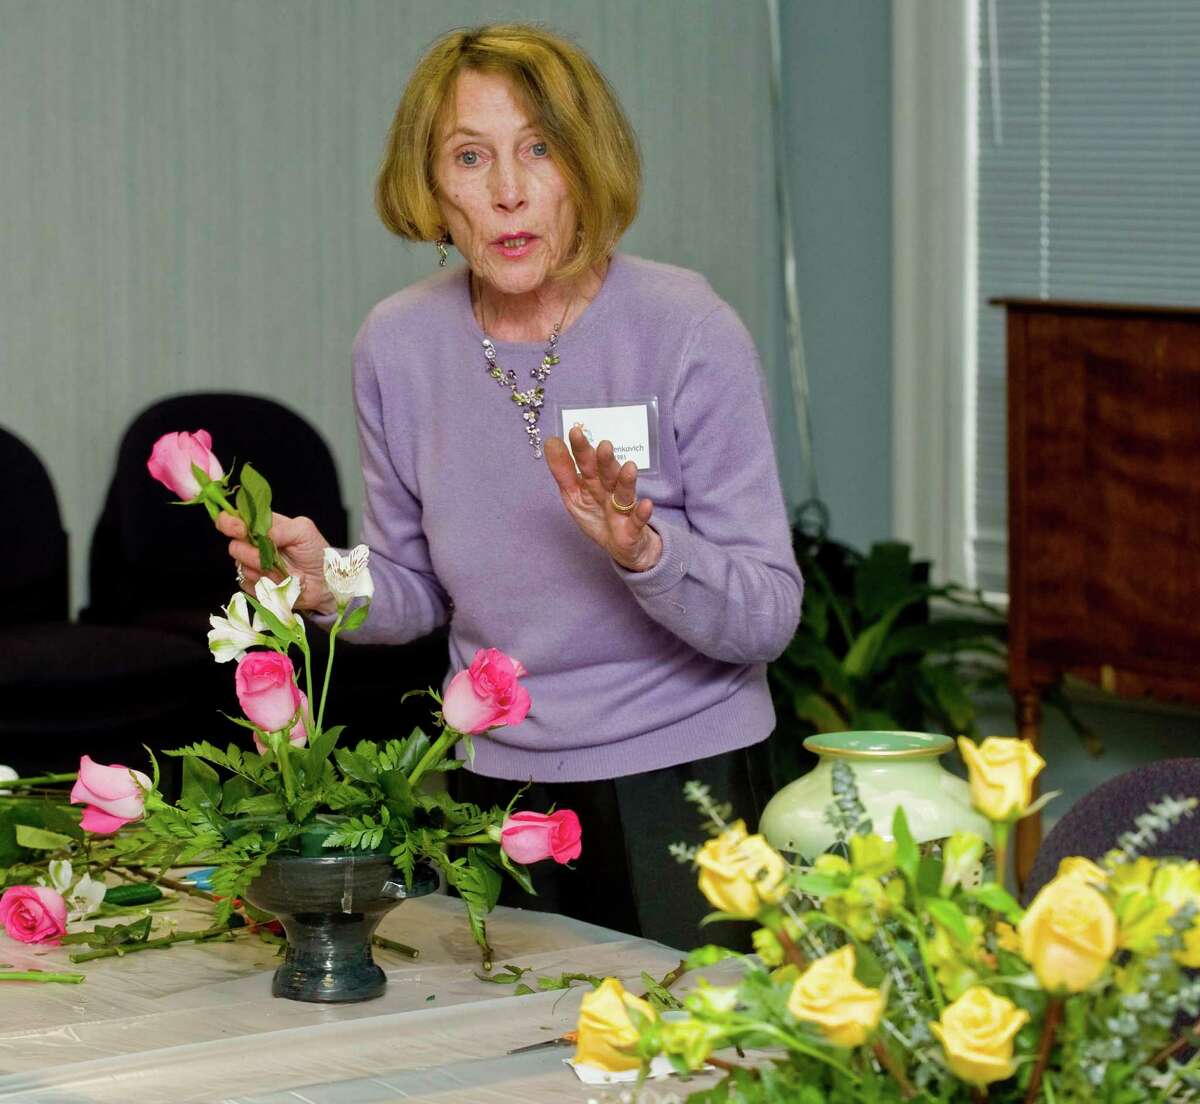 Pat Benkovich, a member of the Garden Club of Newtown and a winner of many ribbons in both creative design and horticulture, gives an arrangement demonstration to club members at the Newtown Library. Tuesday, Feb. 26, 2013